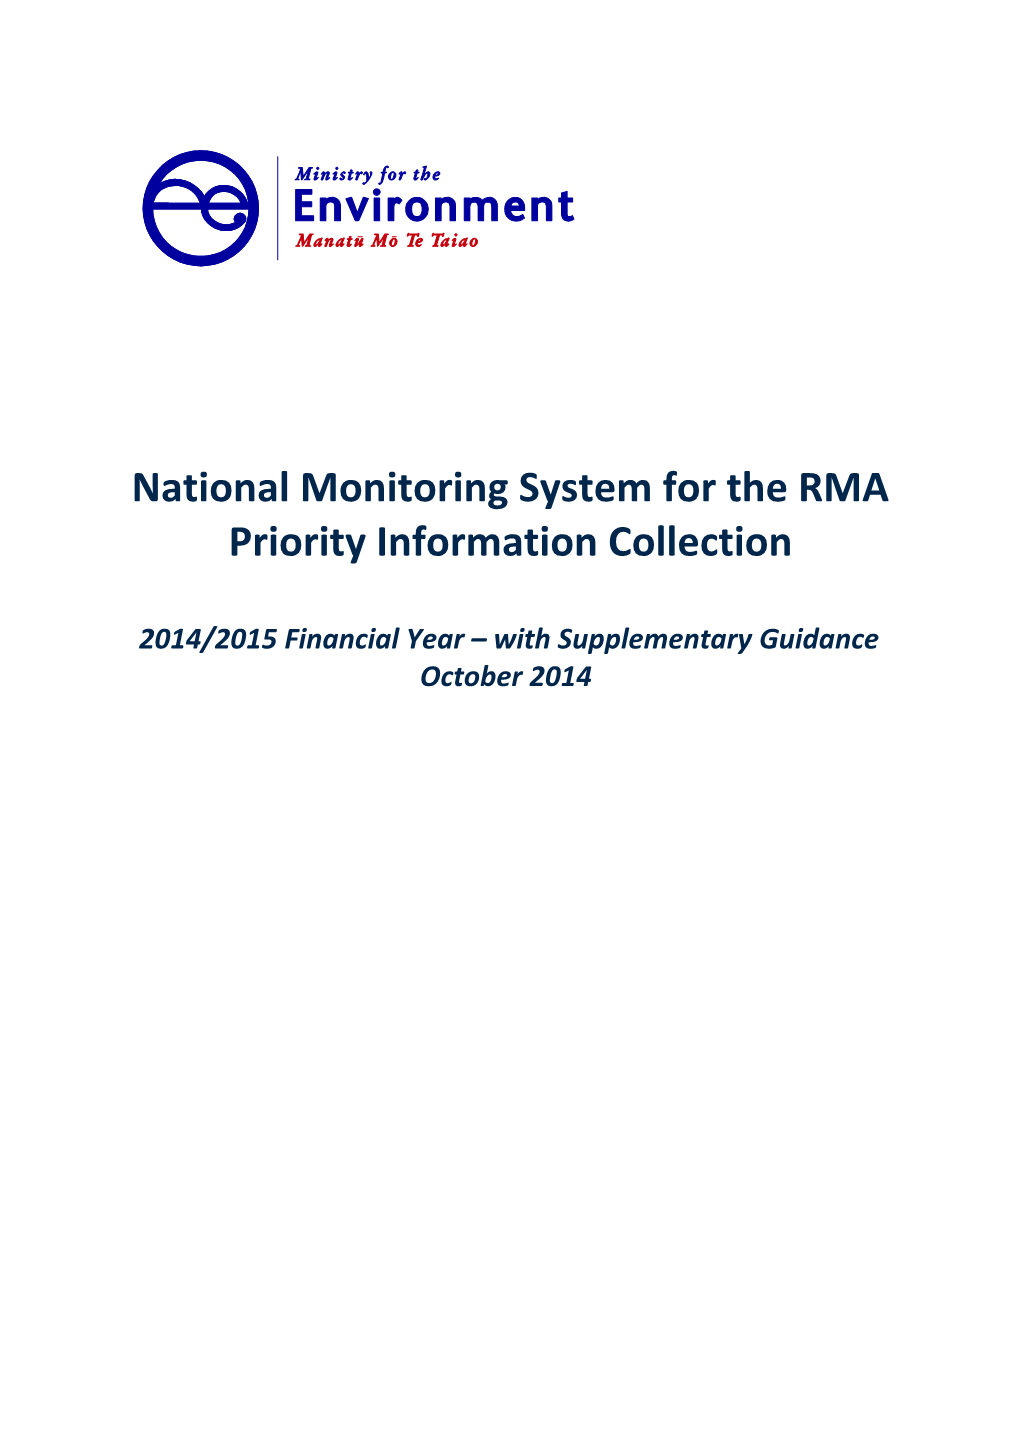 Nms-Rma-Priority-Information-Collection-Final